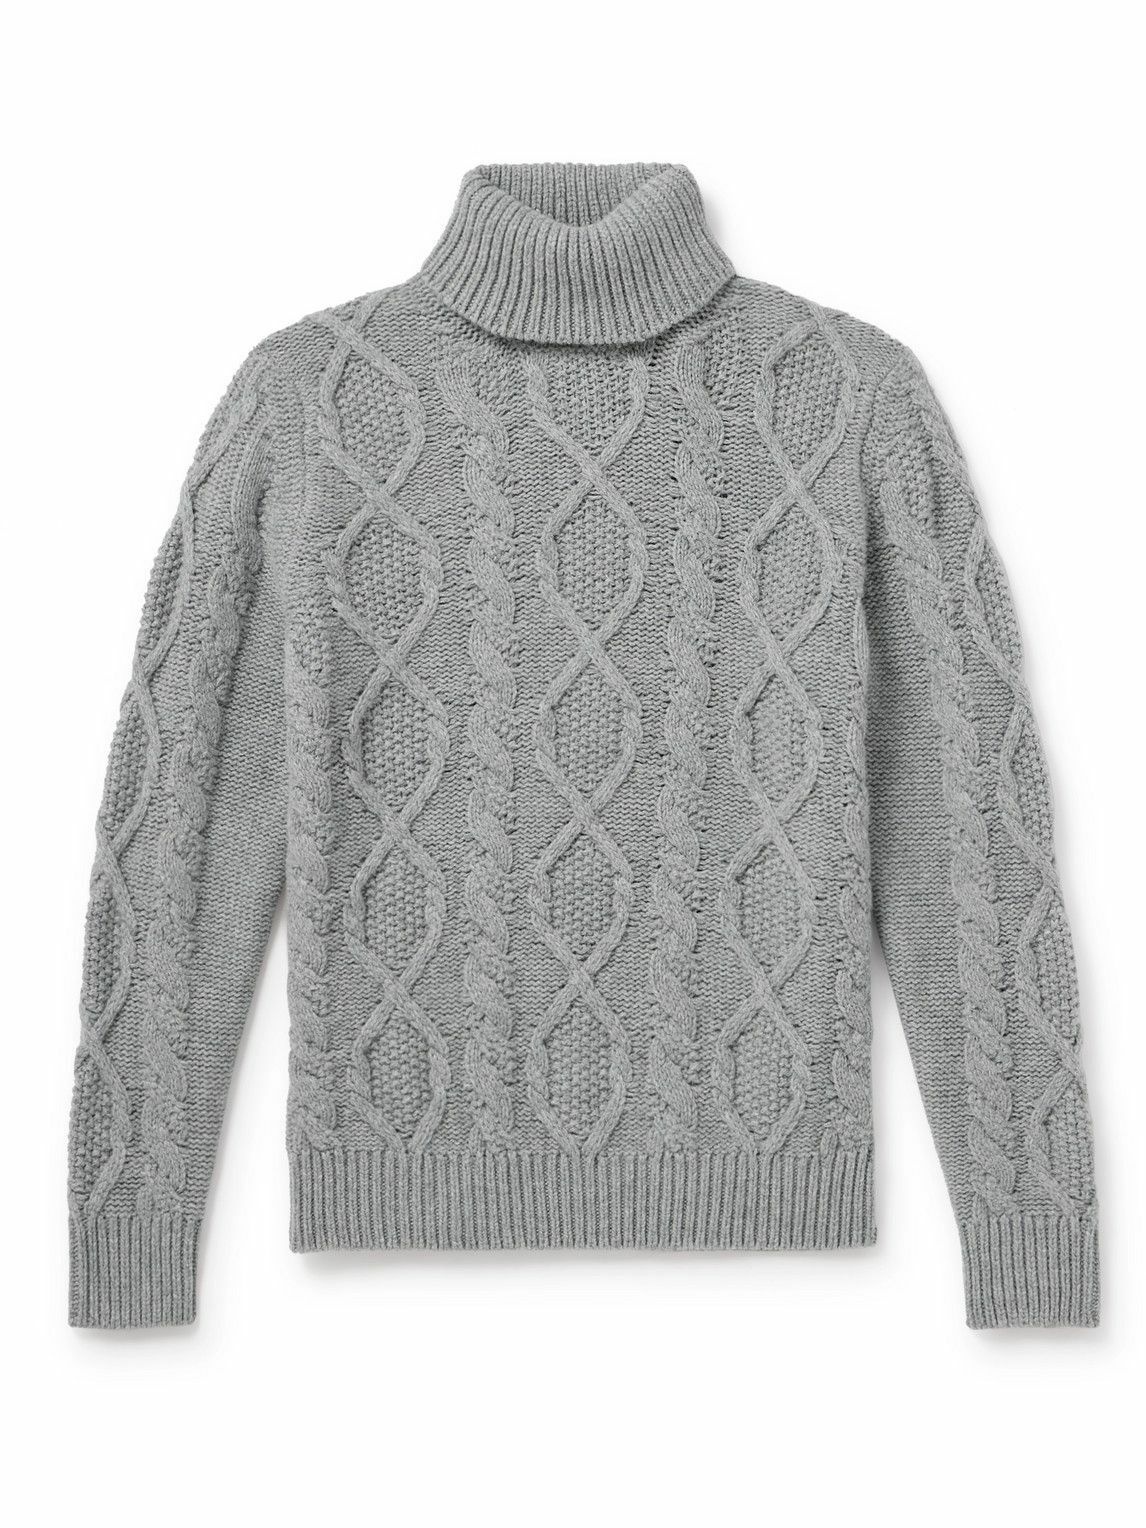 Photo: Anderson & Sheppard - Aran Cable-Knit Wool and Cashmere-Blend Rollneck Sweater - Gray